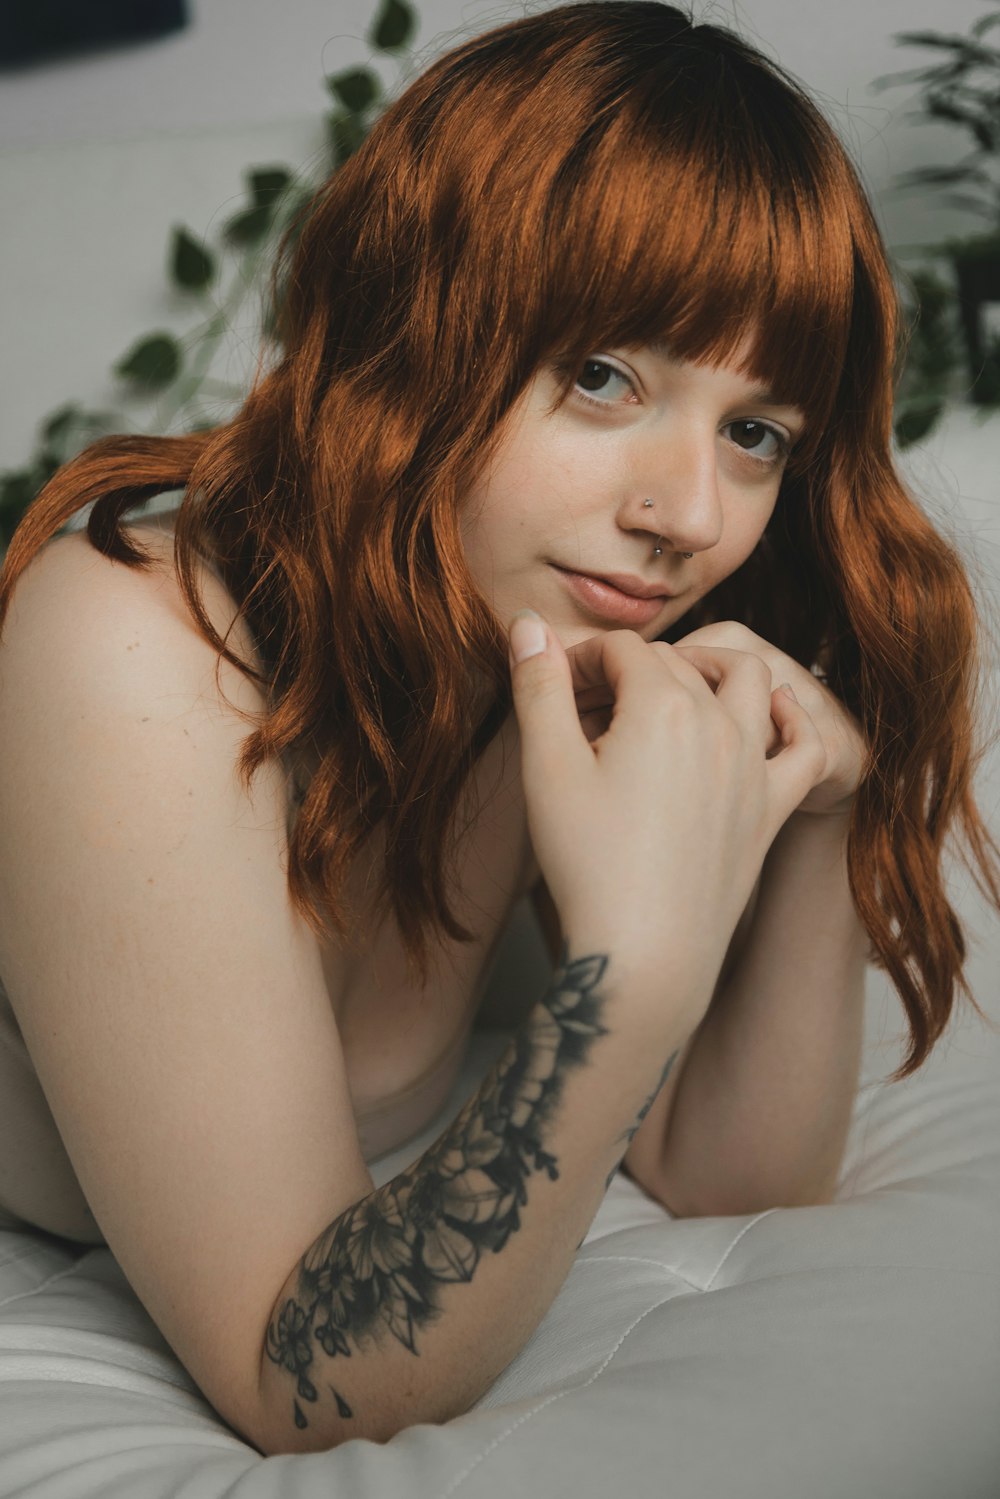 woman with red hair and black floral tattoo on her right hand